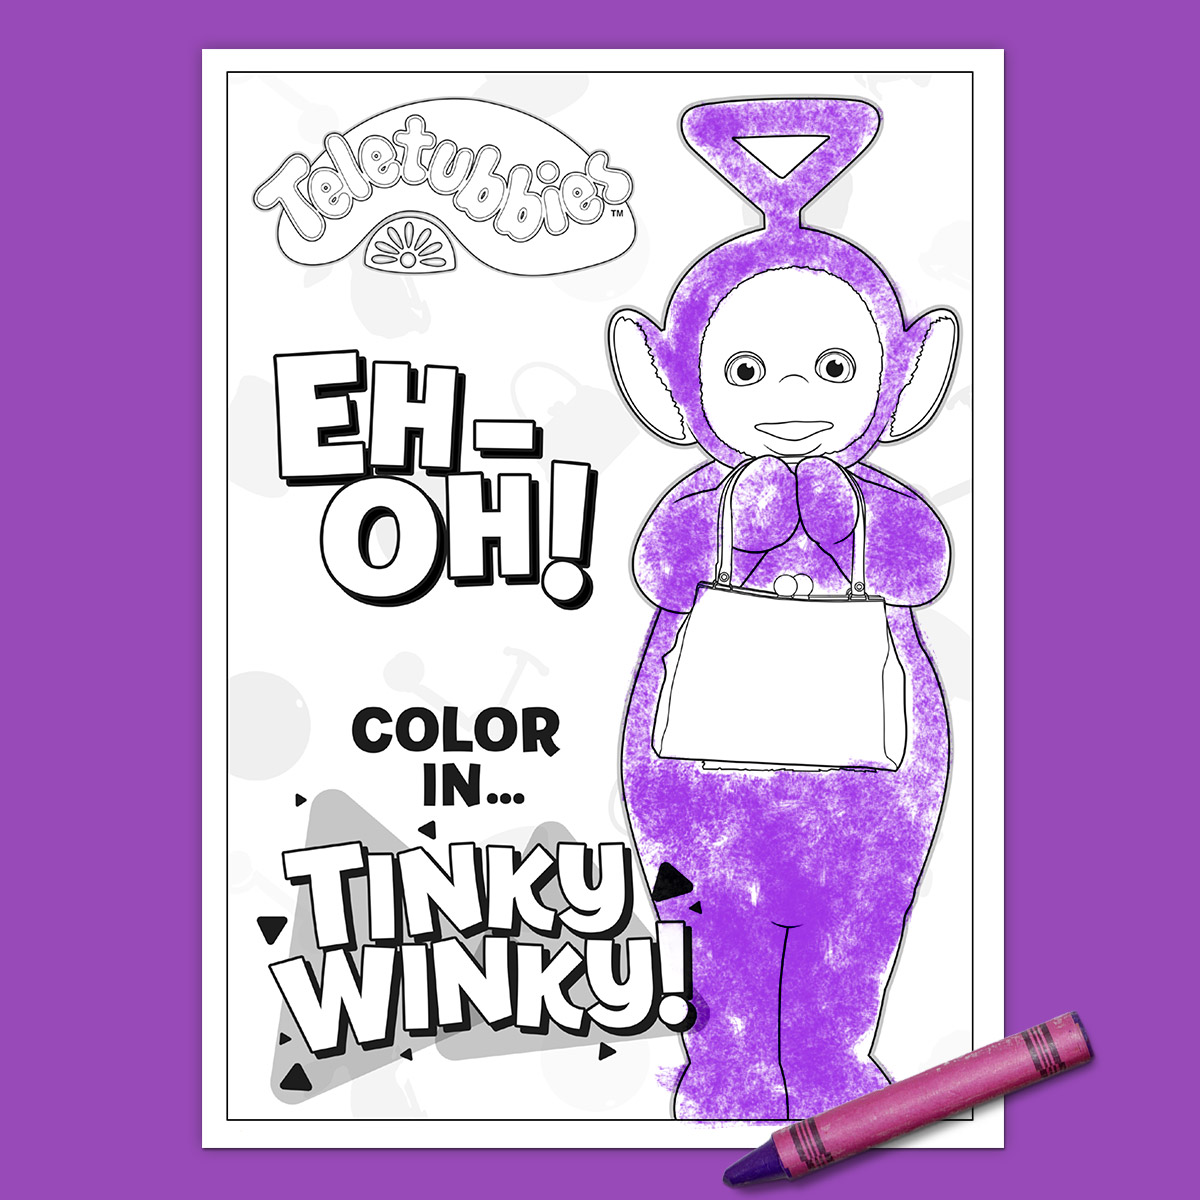 Teletubbies Coloring Page: Tinky Winky